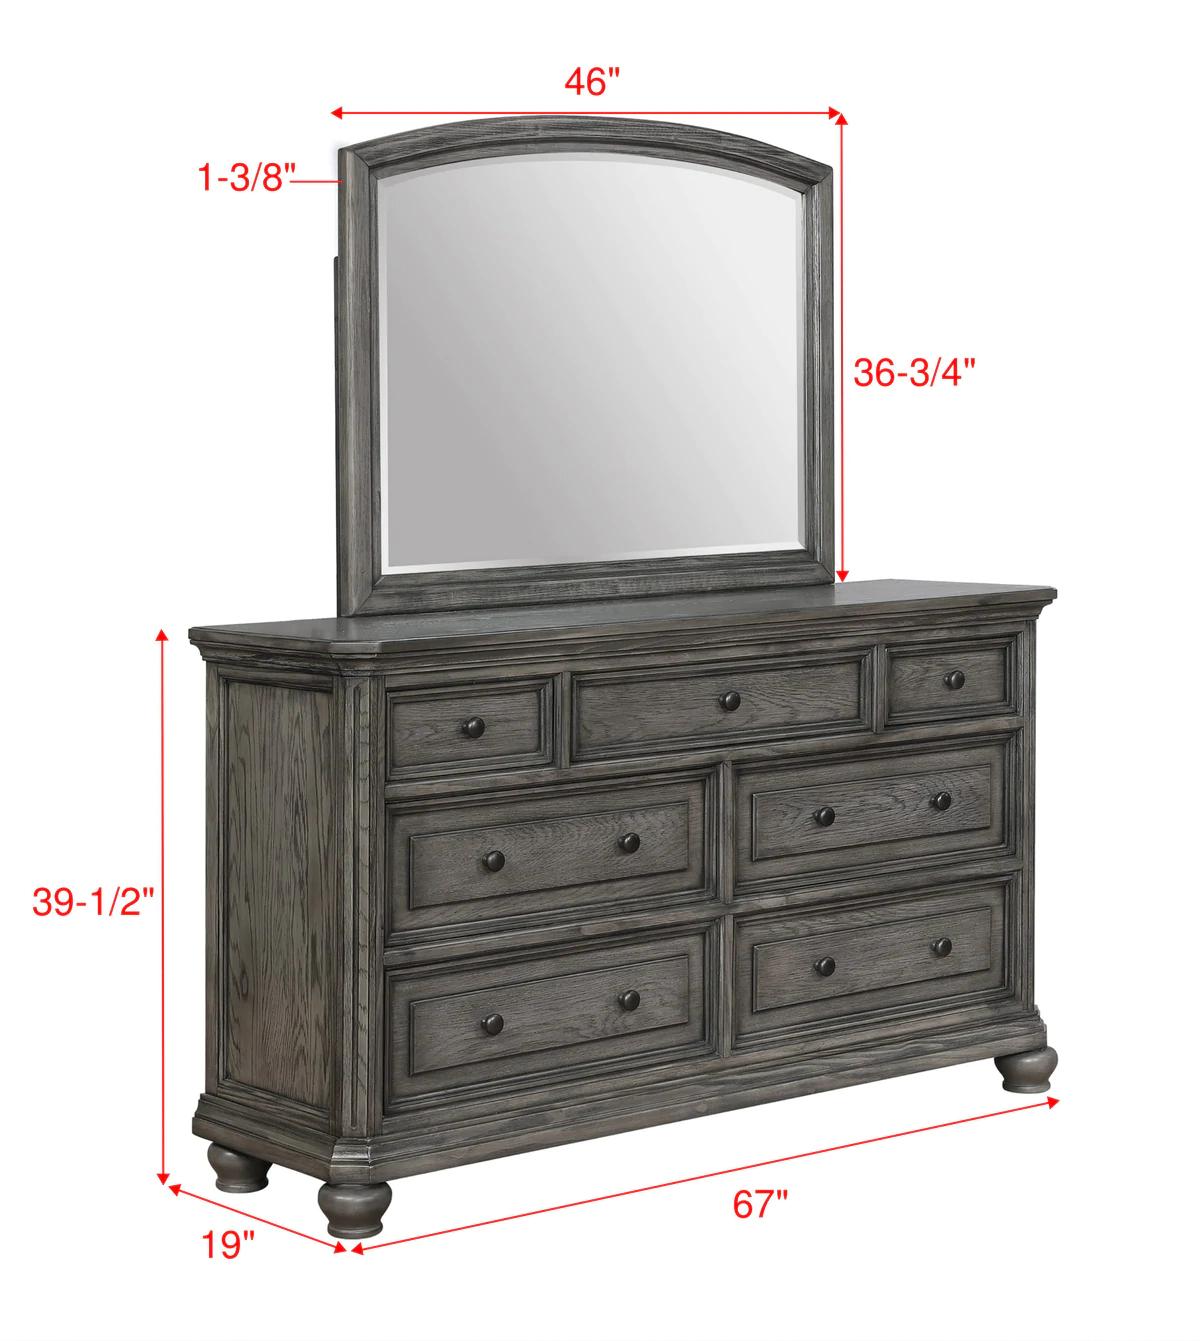 

    
B1885-K-Bed-6pcs Gray Panel Bedroom Set w/ Storage Drawers by Crown Mark Lavonia B1885-K-Bed-6pcs
